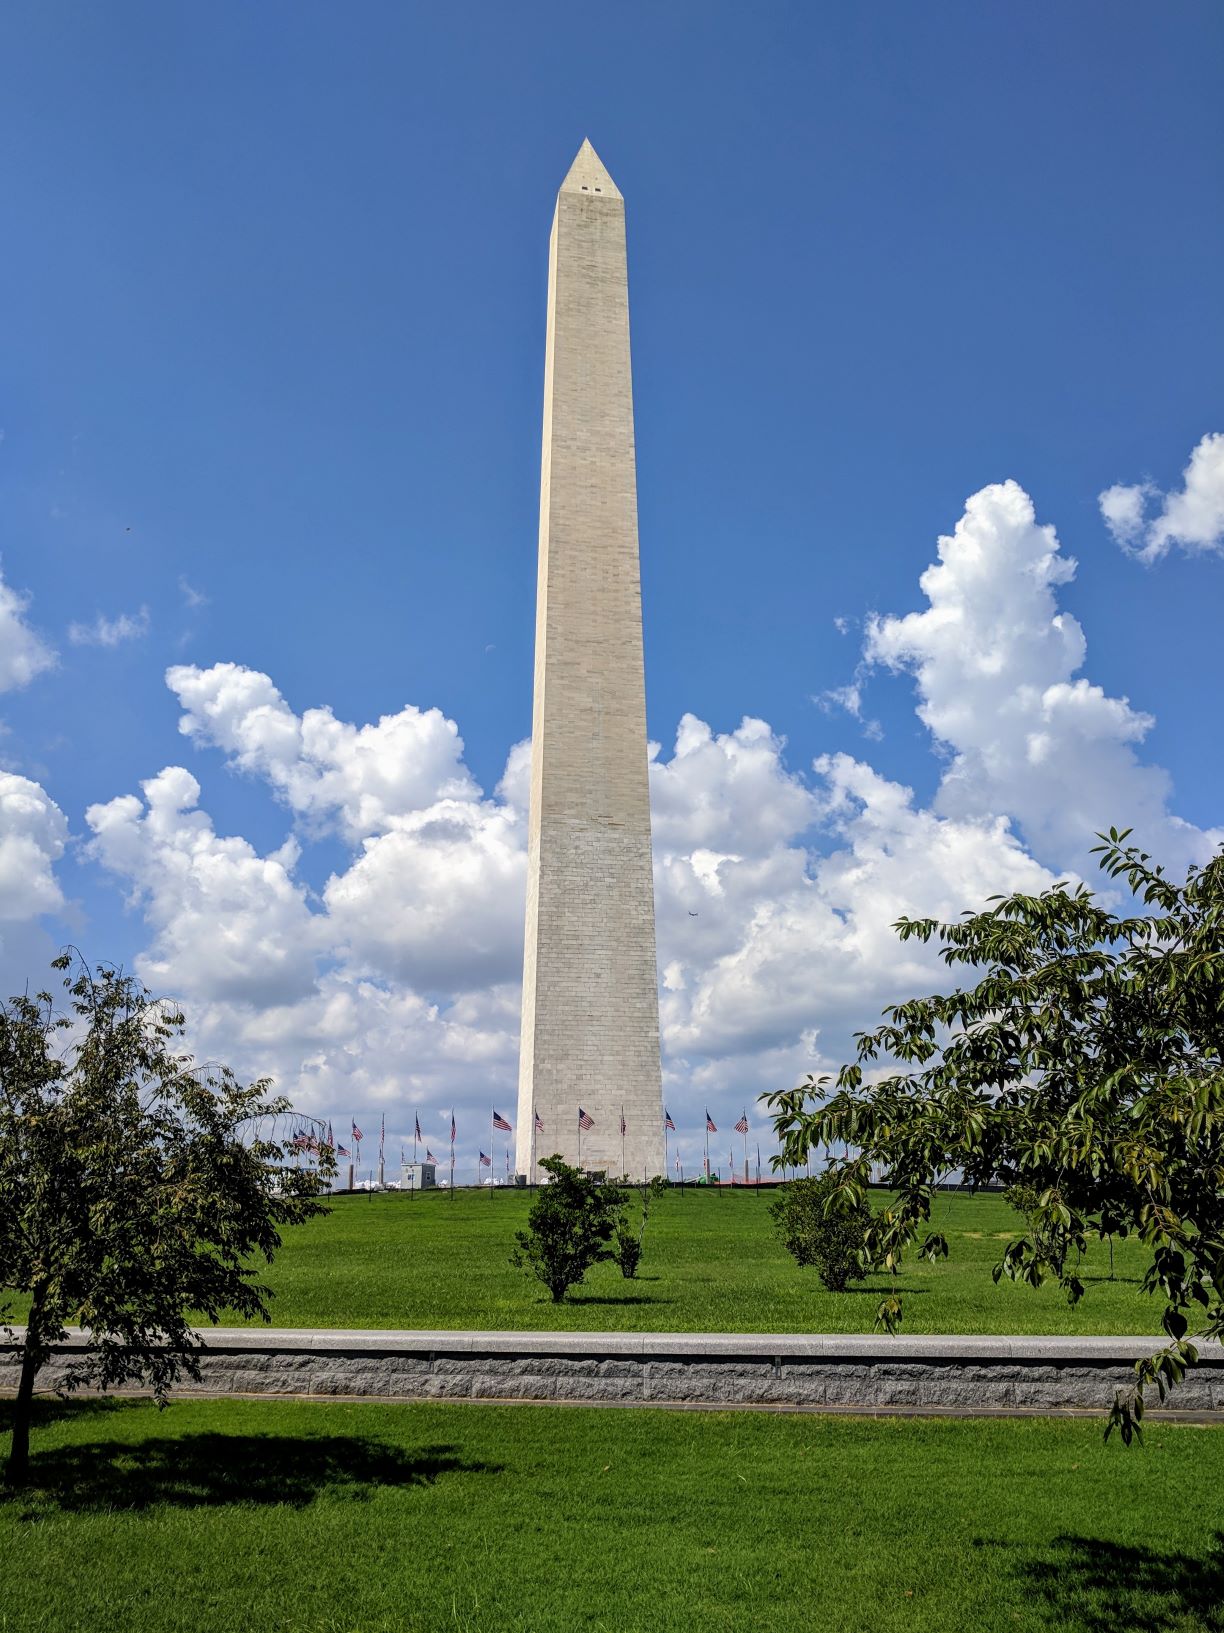 dc monuments to visit